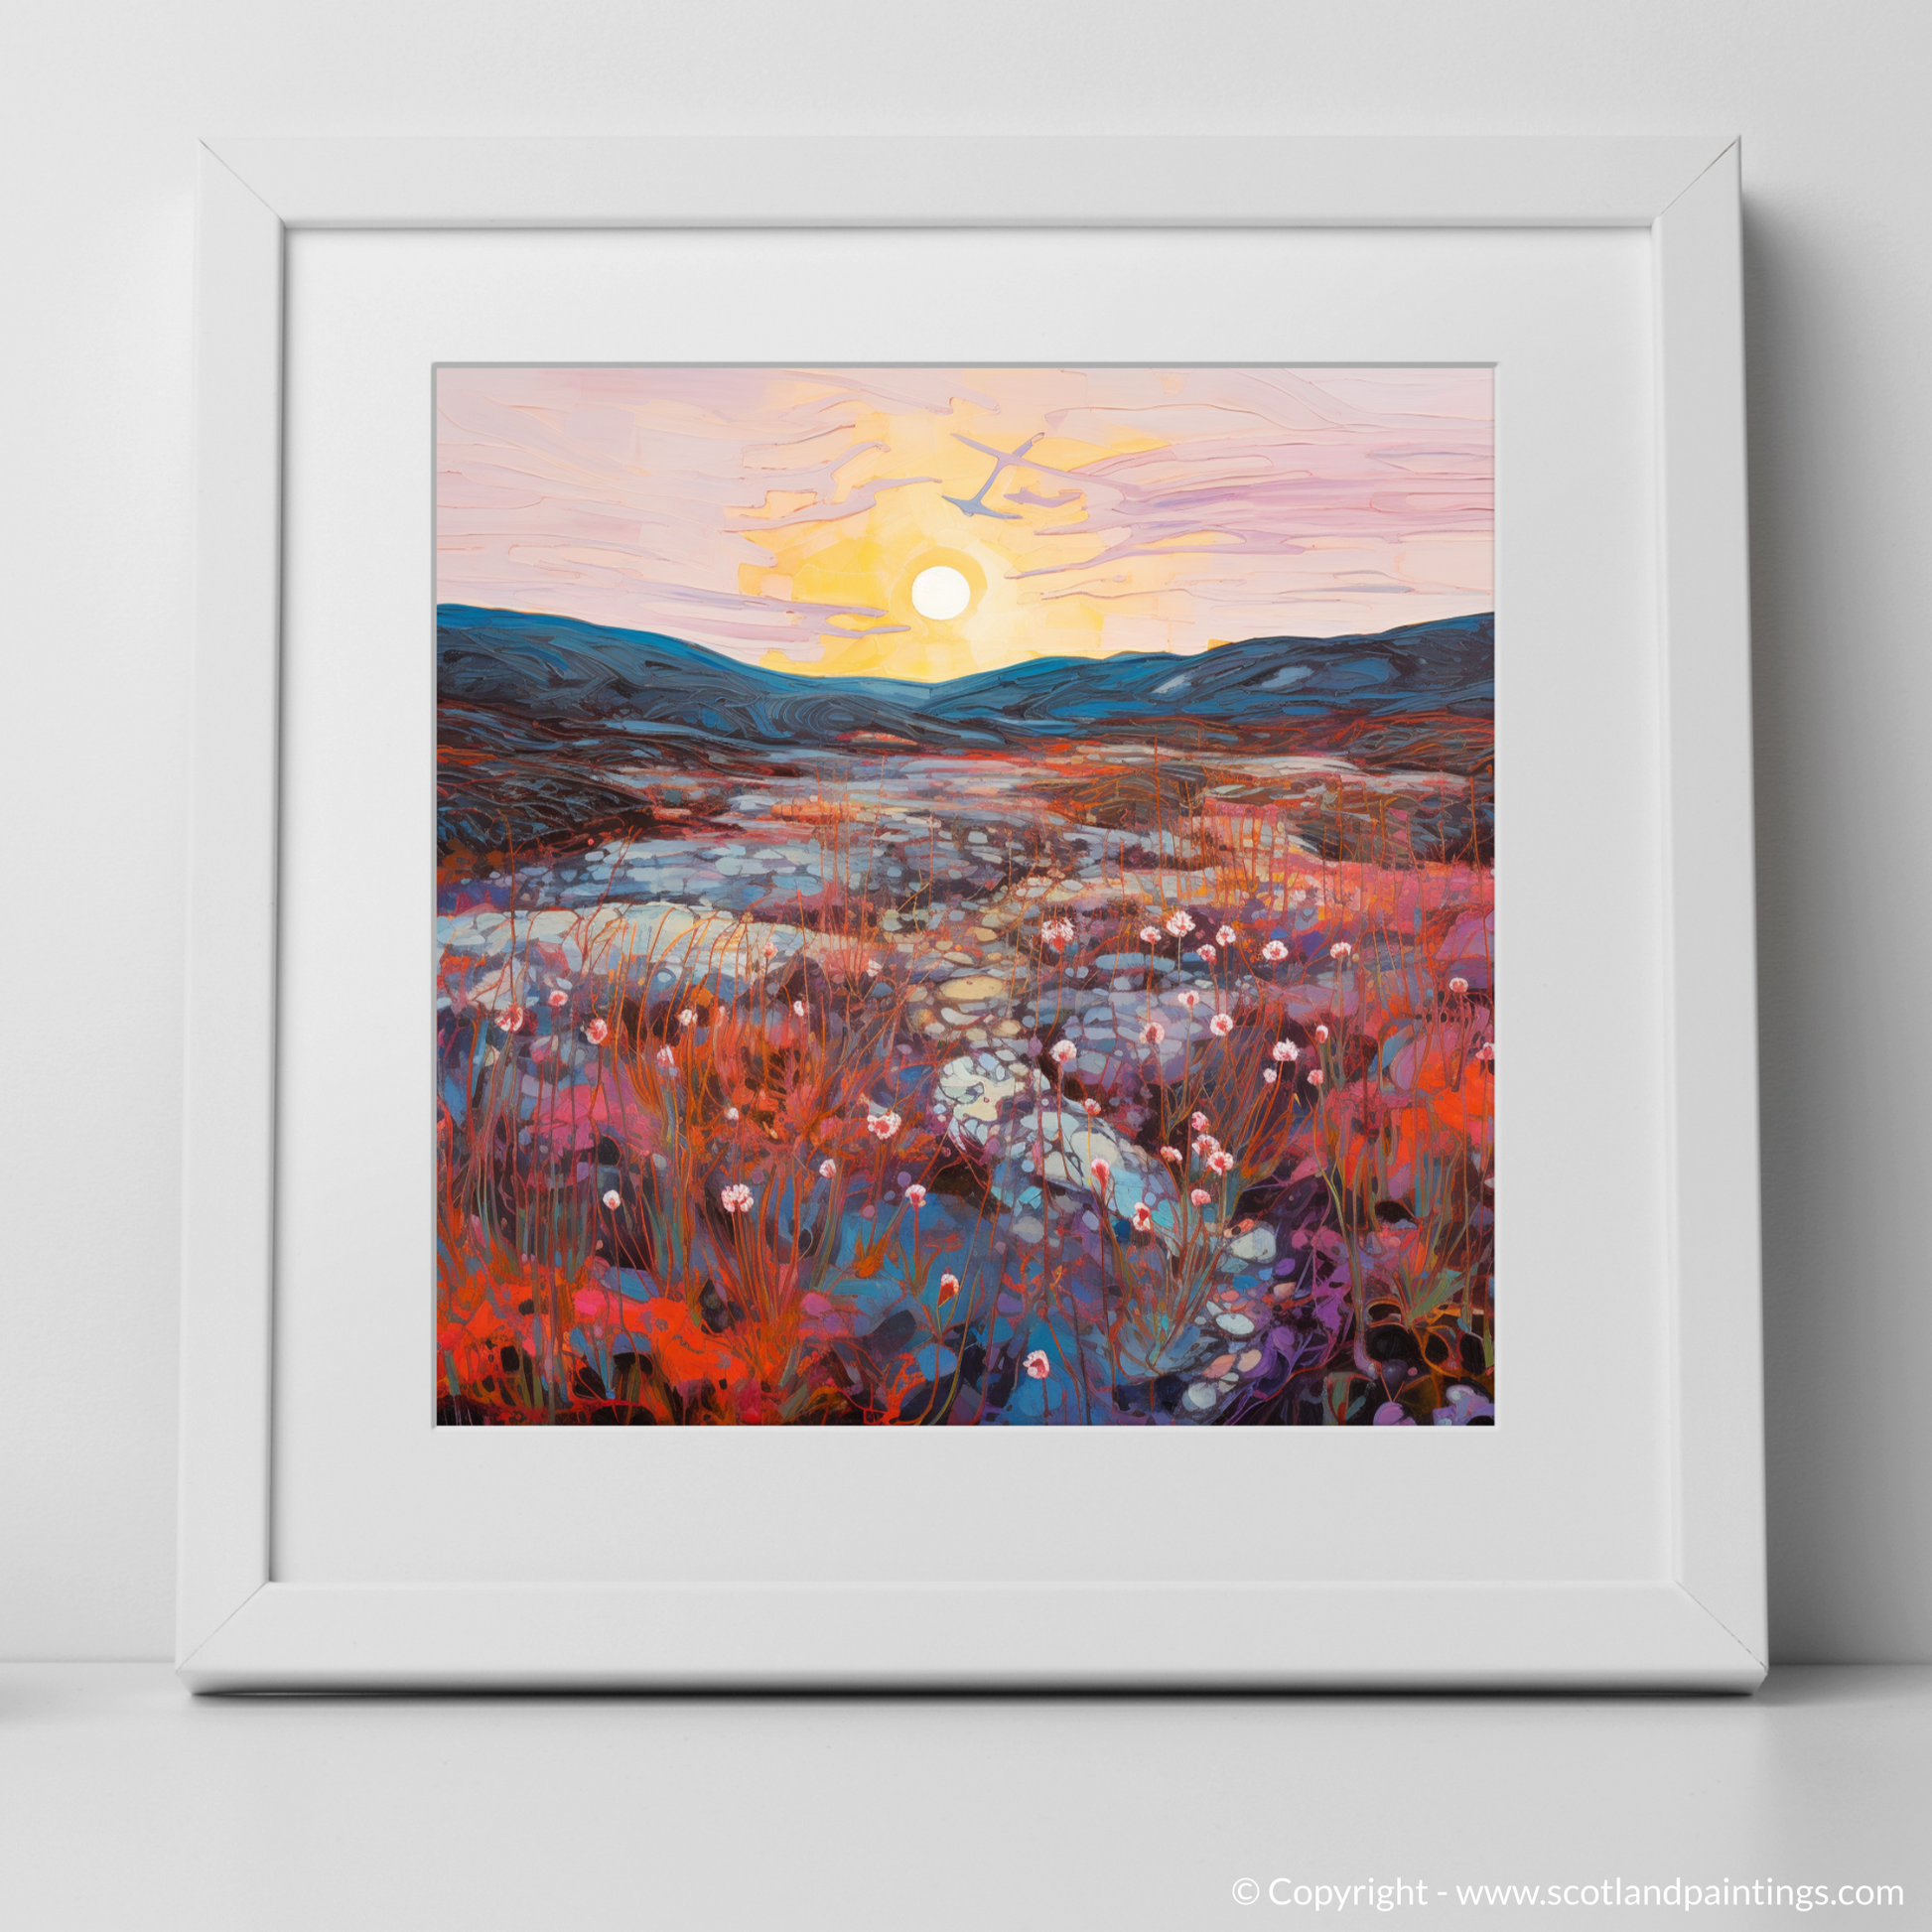 Art Print of Crowberry patches at dusk in Glencoe with a white frame